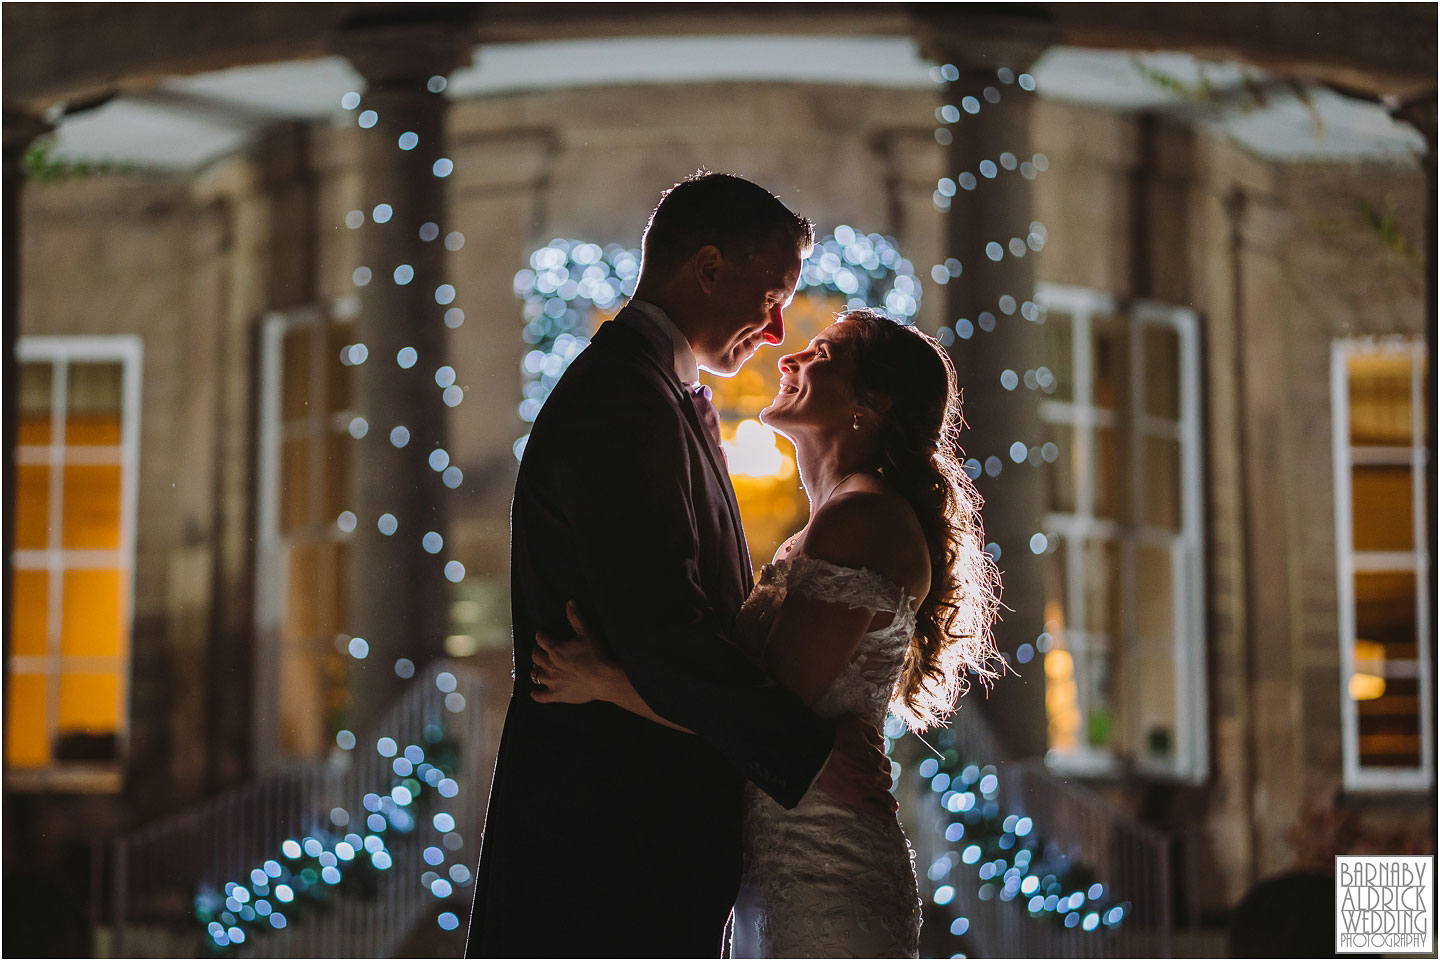 Evening flash portraits at Wood Hall Hotel in Wetherby